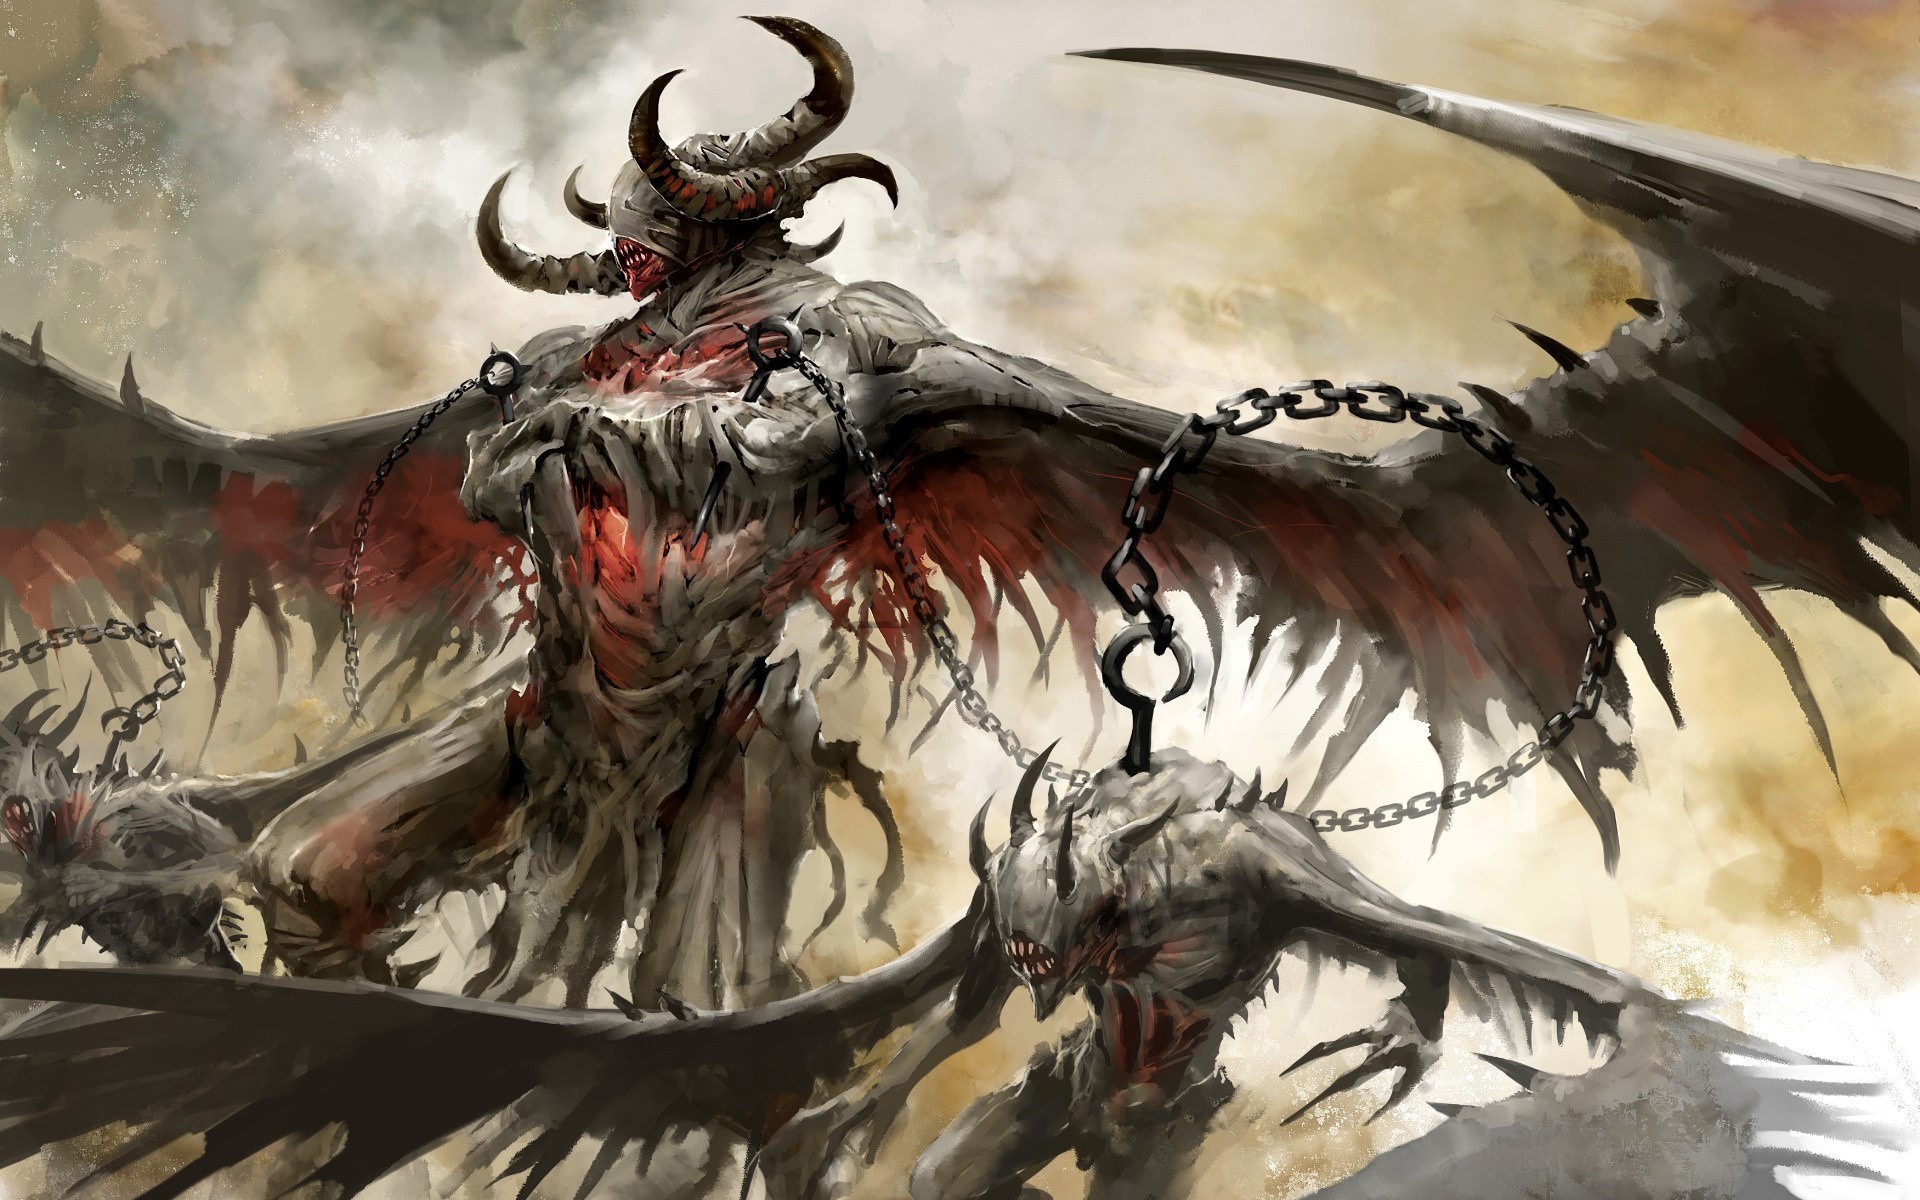 General 1920x1200 Guild Wars Guild Wars 2 video games fantasy art demon PC gaming creature chains wings horns video game art